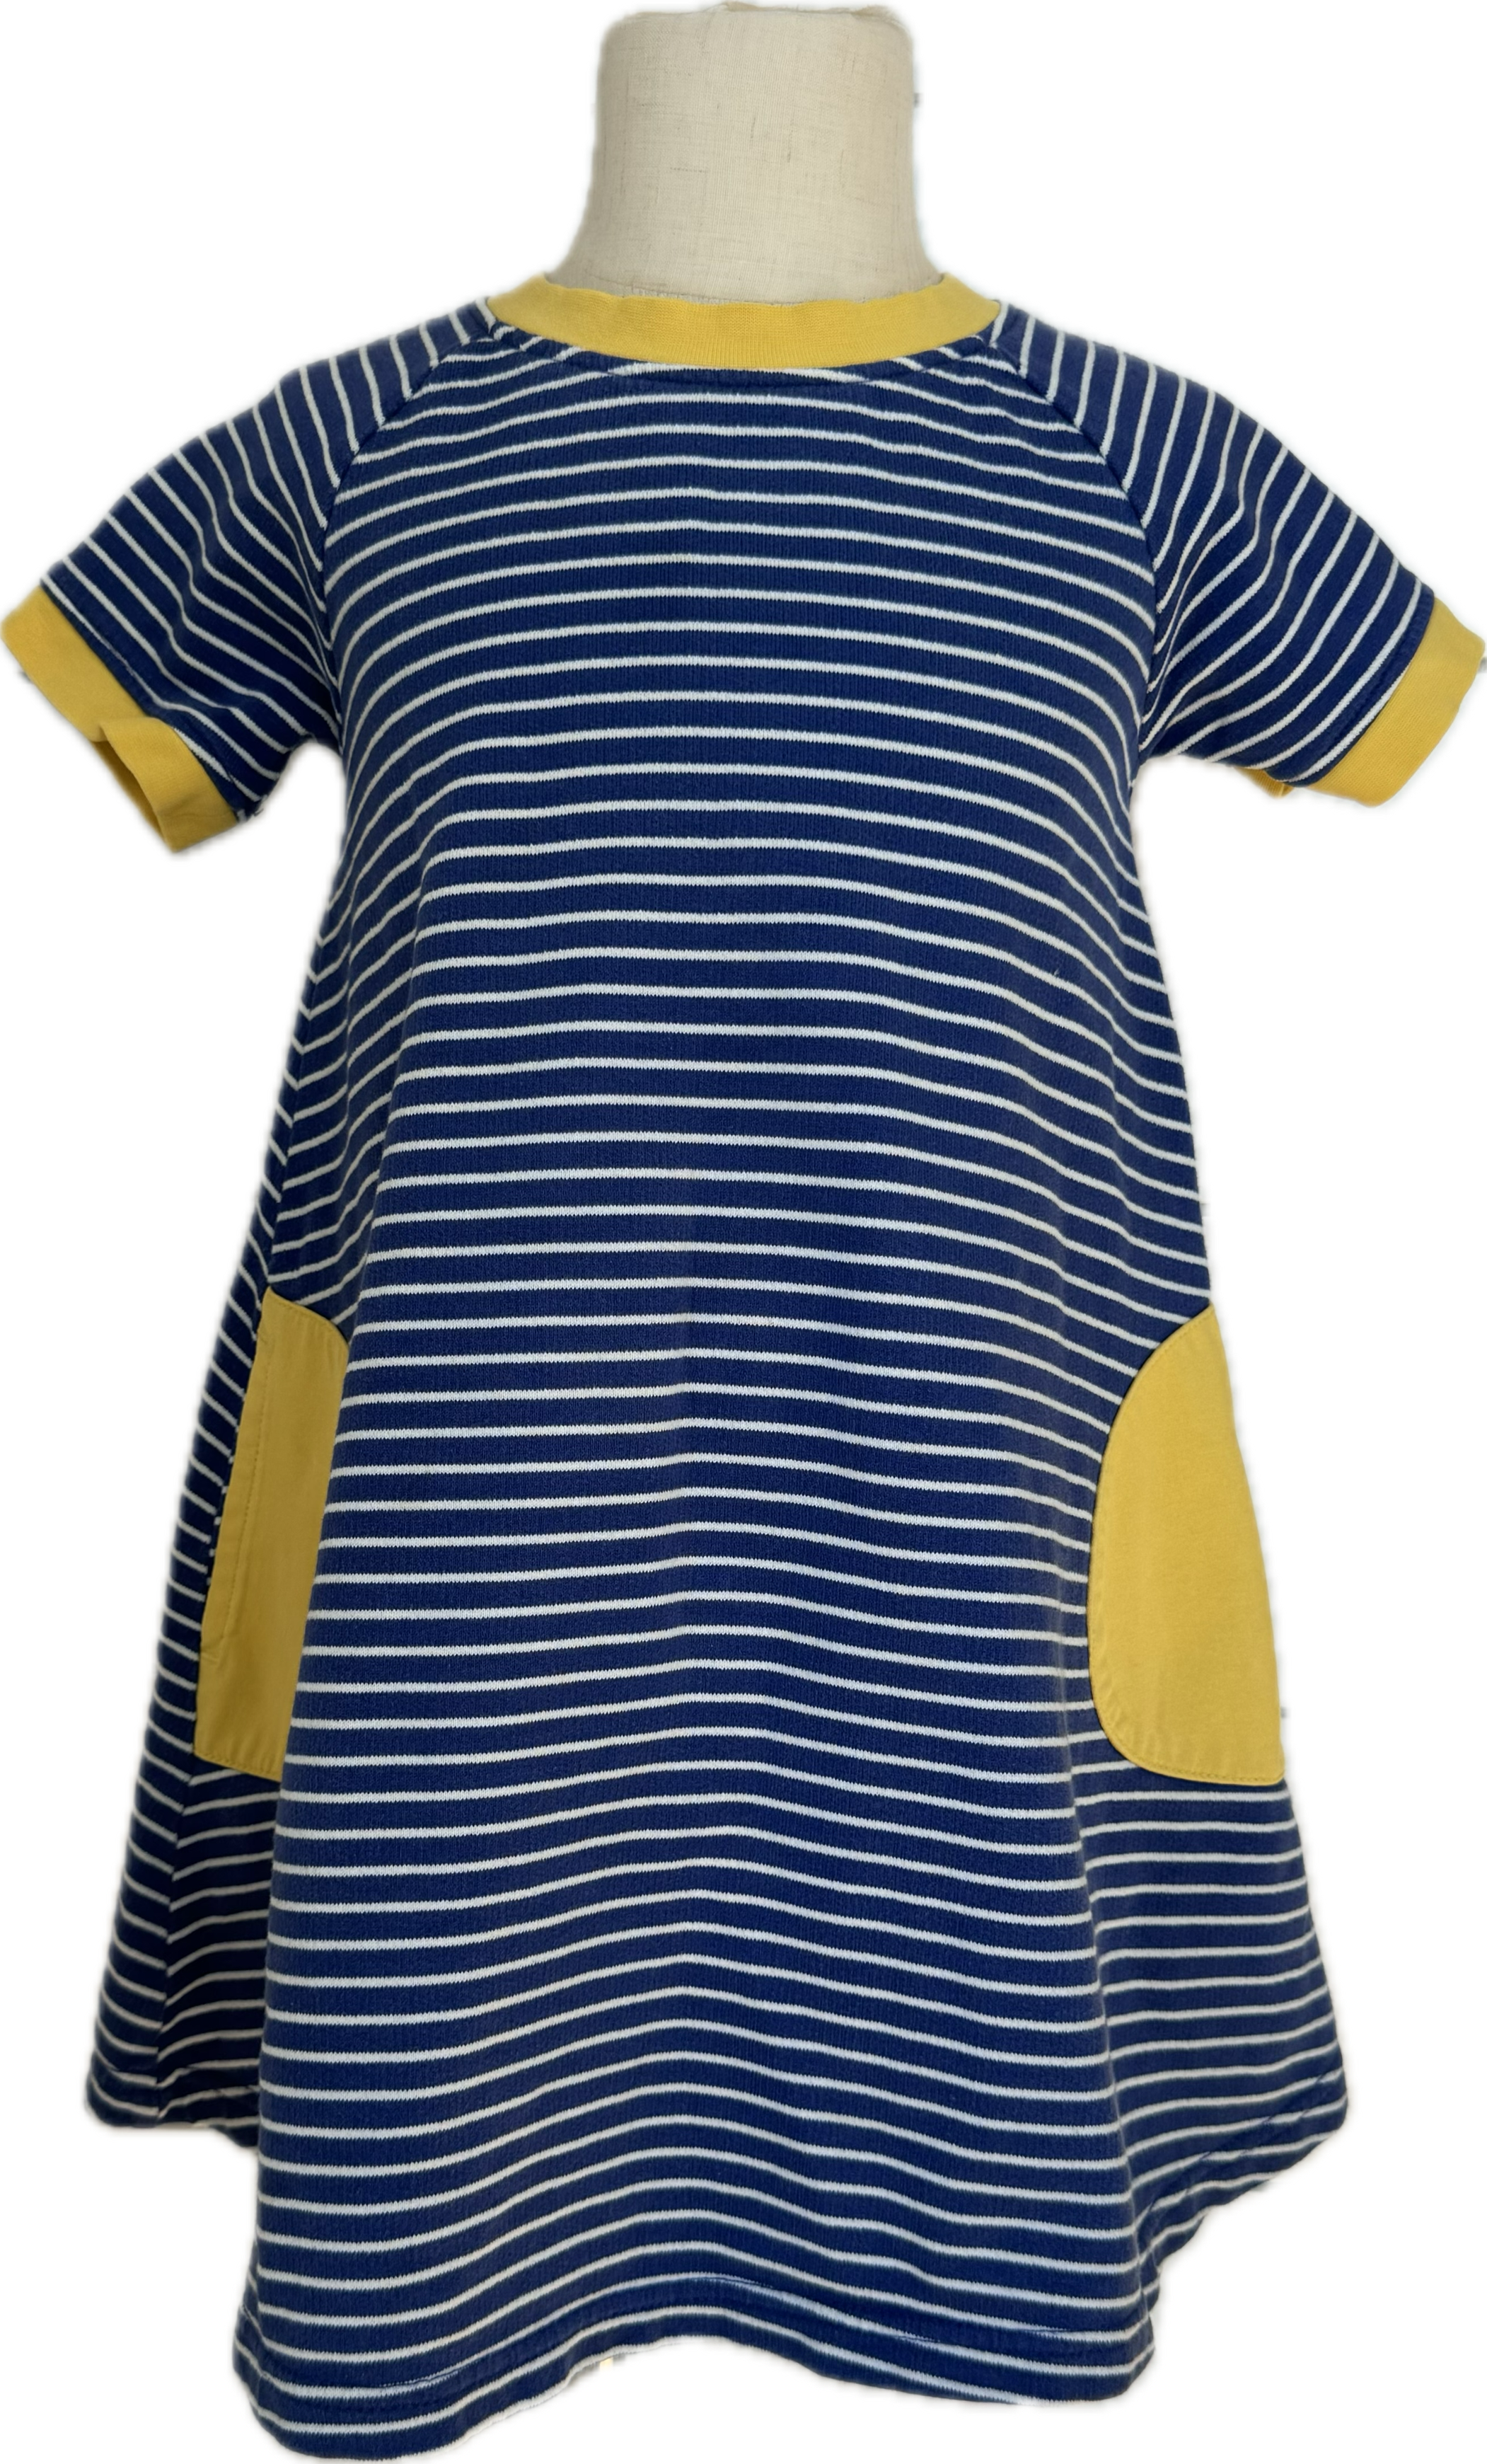 Hanna Andersson Striped Dress, Blue/Yellow Girls Size 110